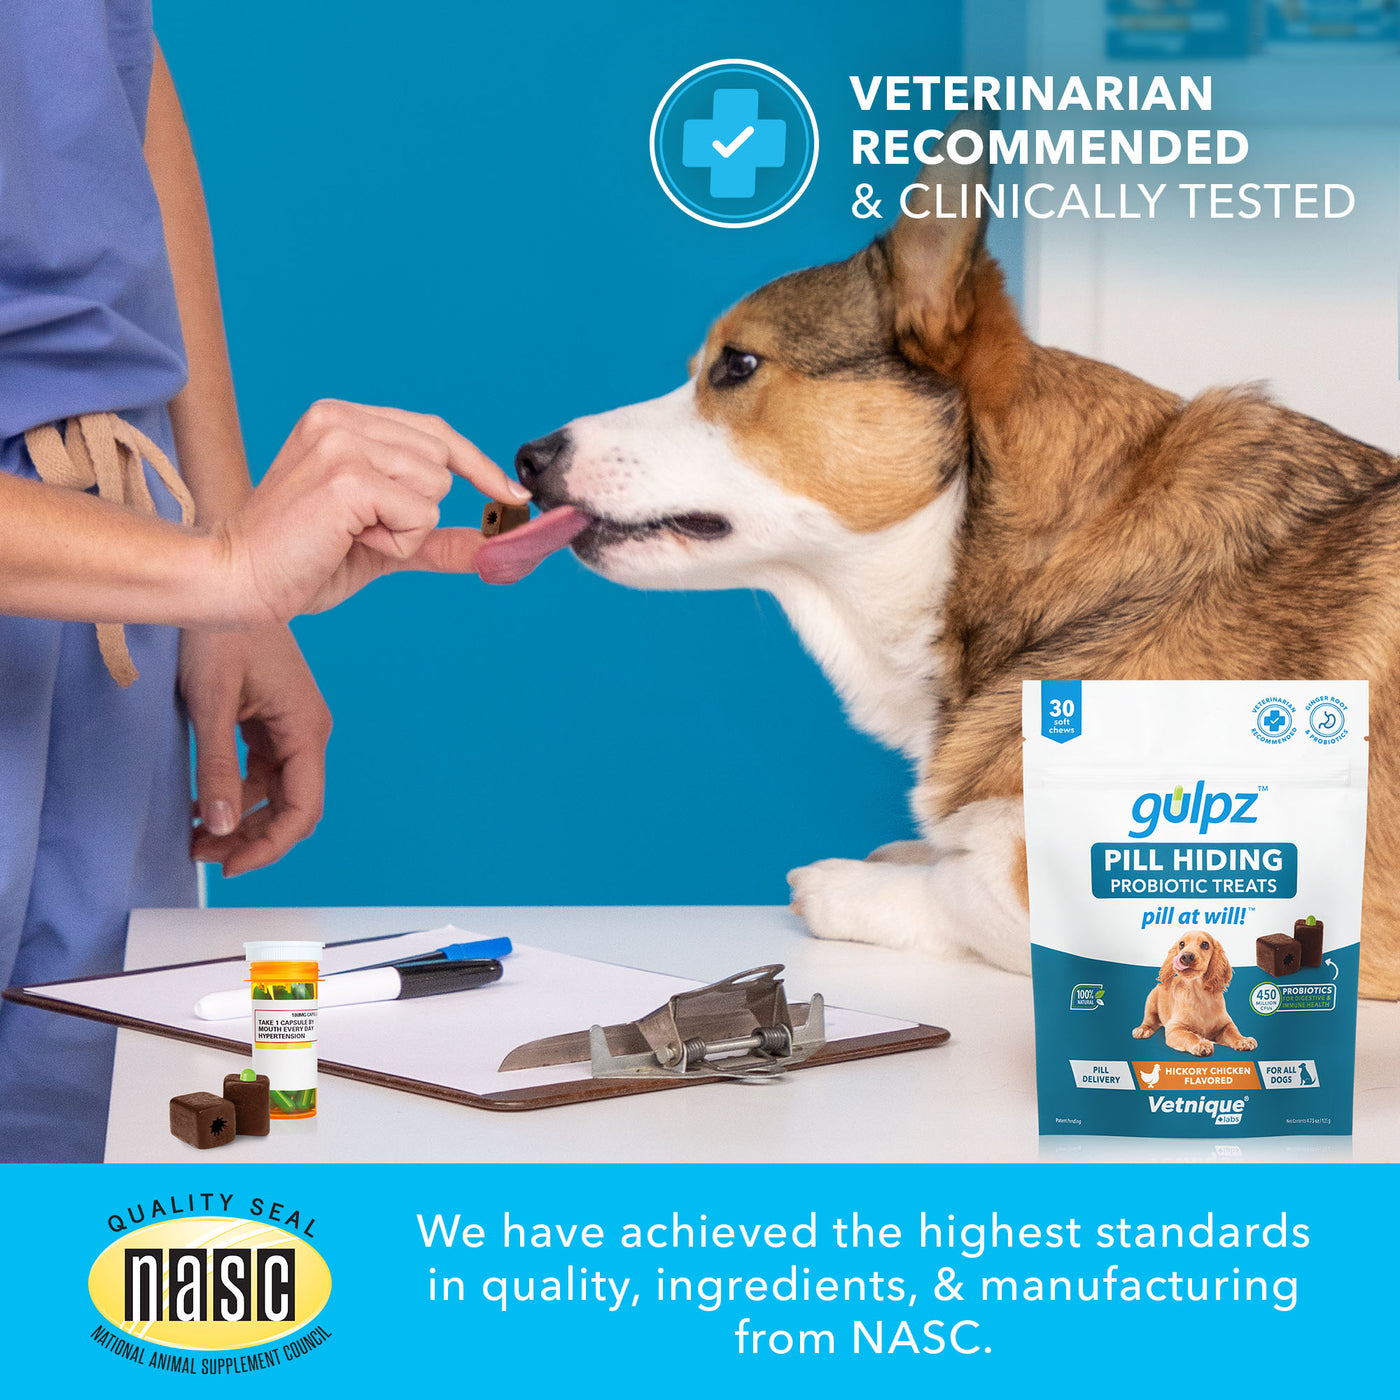 Veterinarian Recommended & Clinically Tested